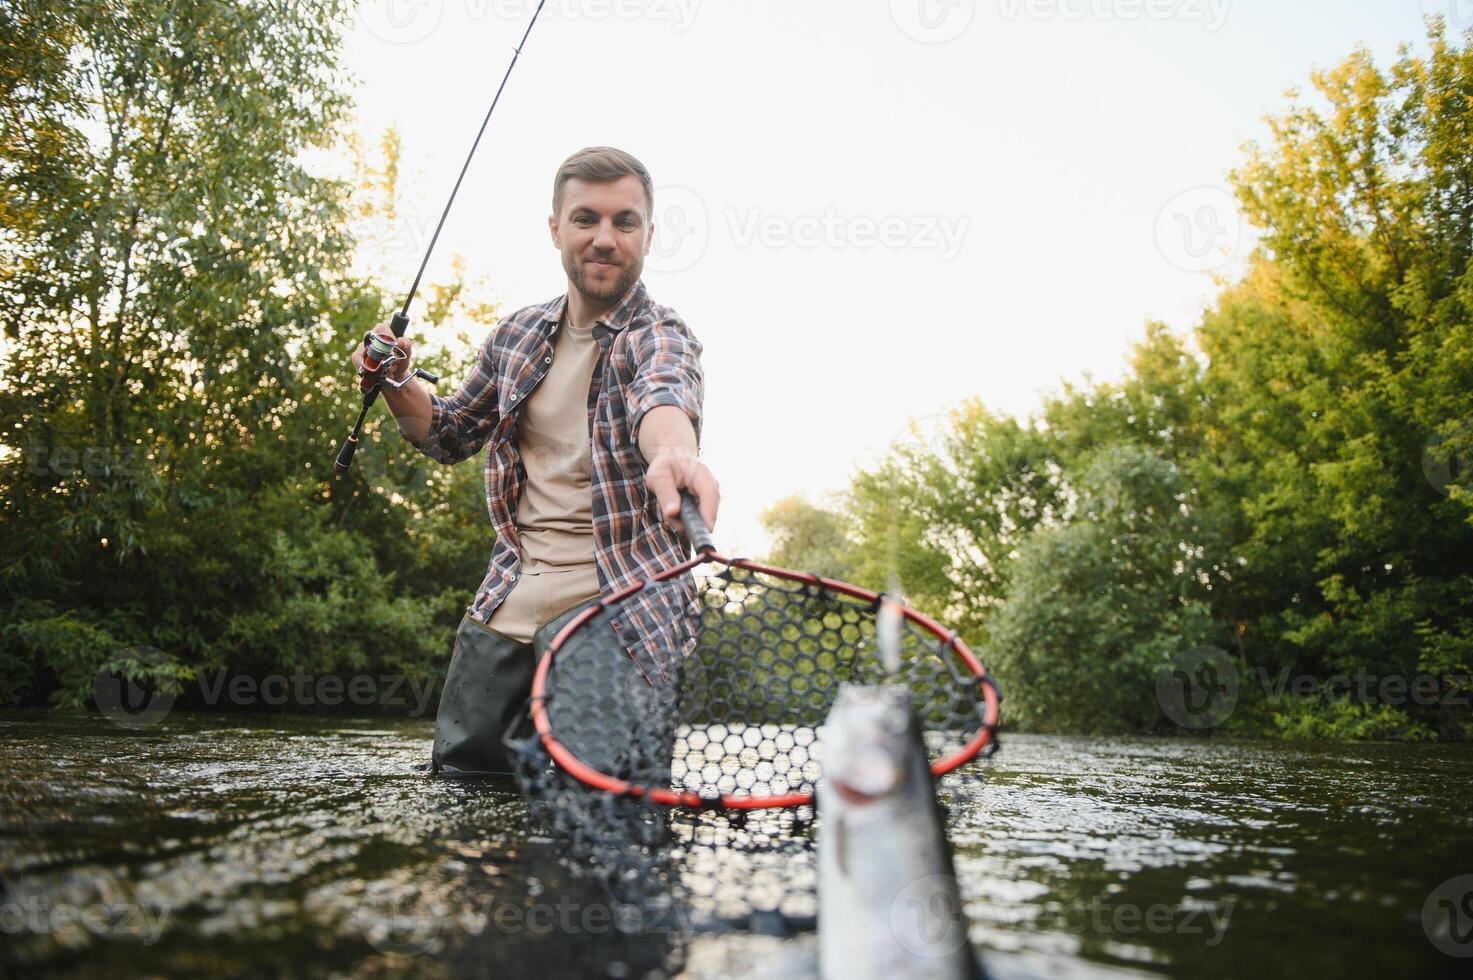 Man with fishing rod, fisherman men in river water outdoor. Catching trout fish in net. Summer fishing hobby photo